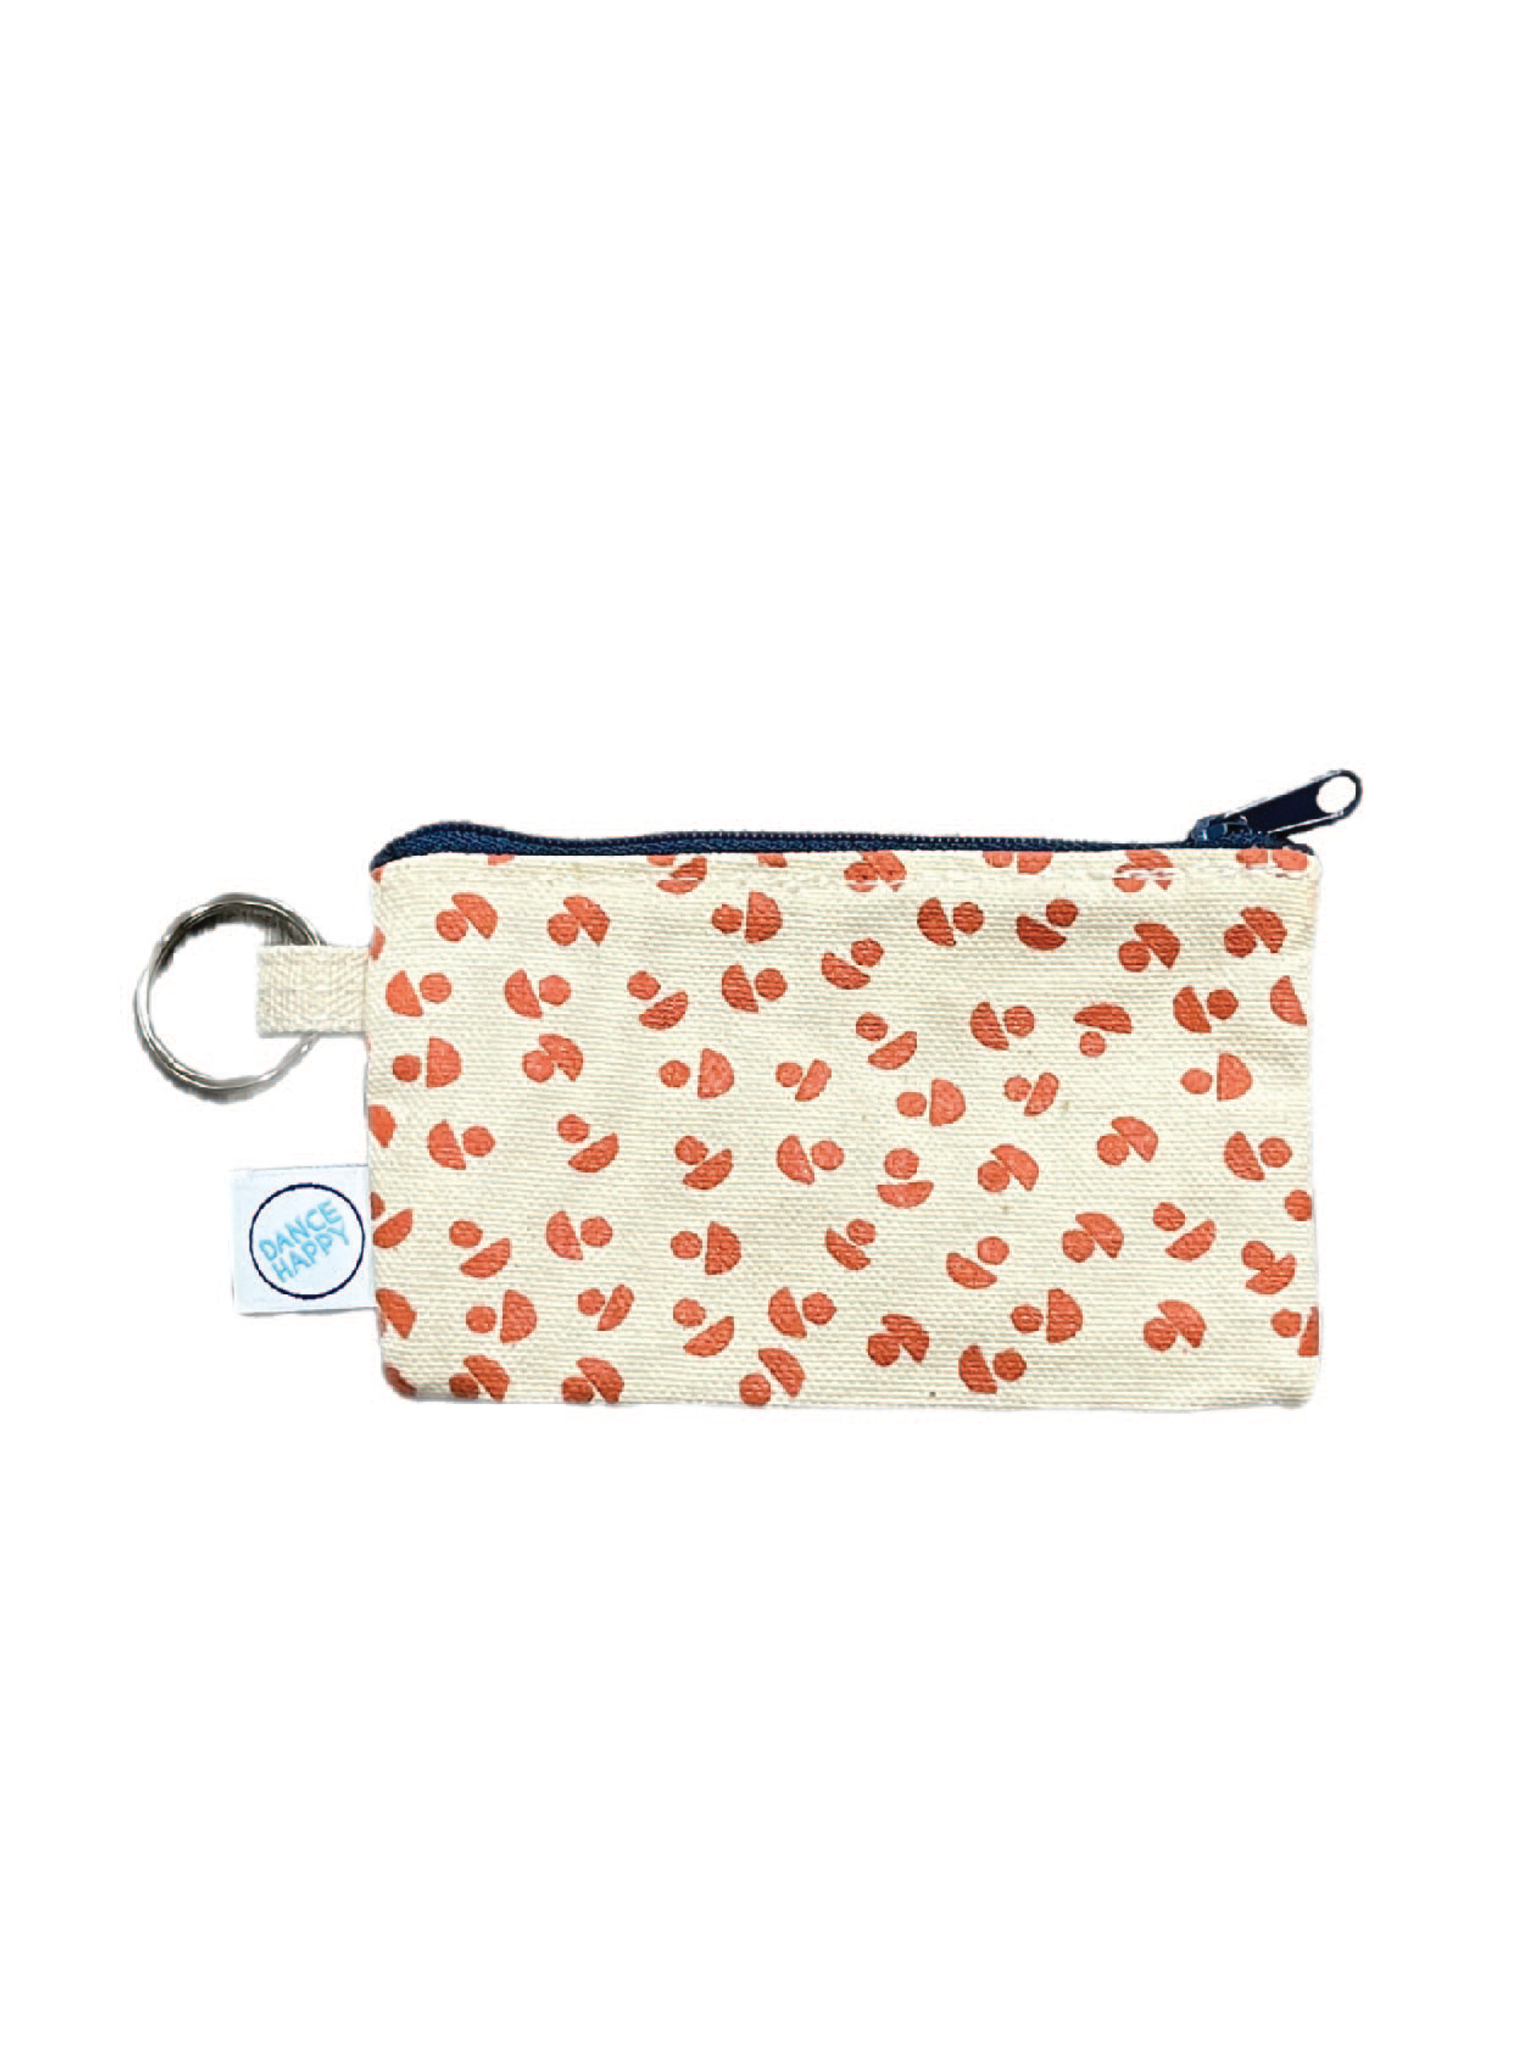 Inclusion Matters cardholder with keyring